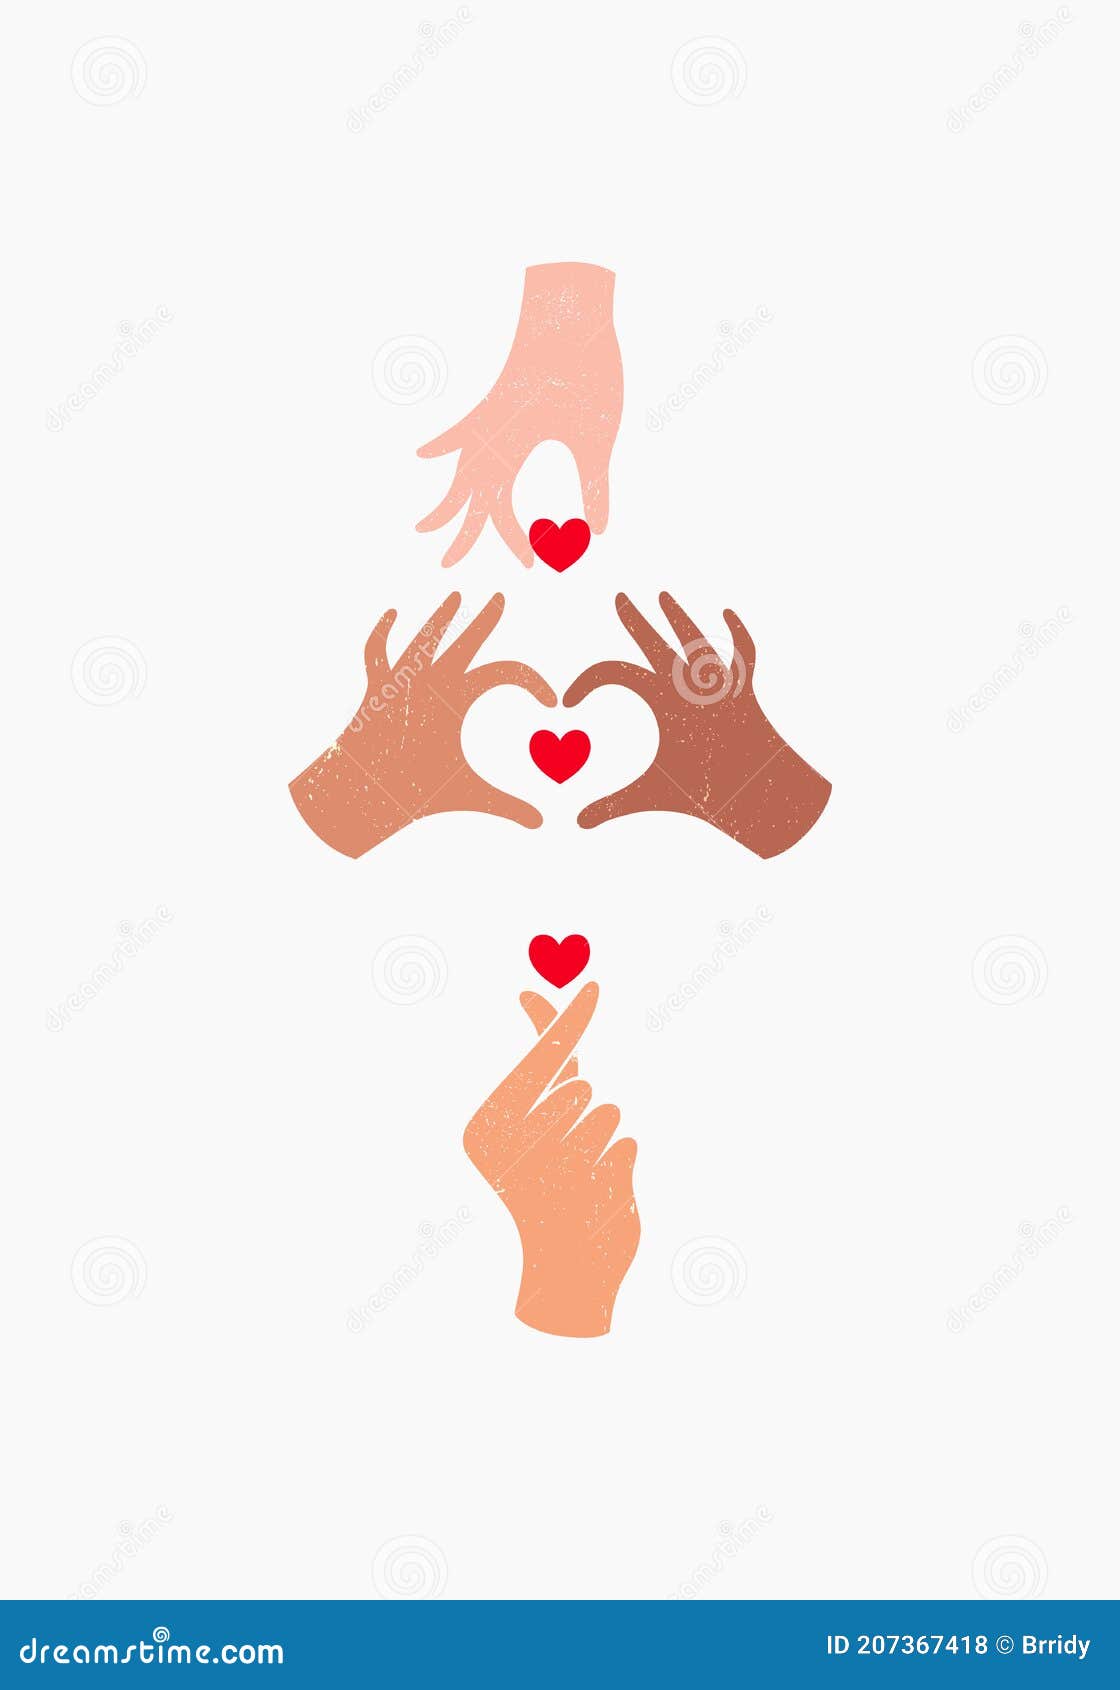 Hands of Diverse Group of People Holding Hands Together. Flat Cartoon  Vector Illustration Stock Illustration - Illustration of romance,  partnership: 207367418